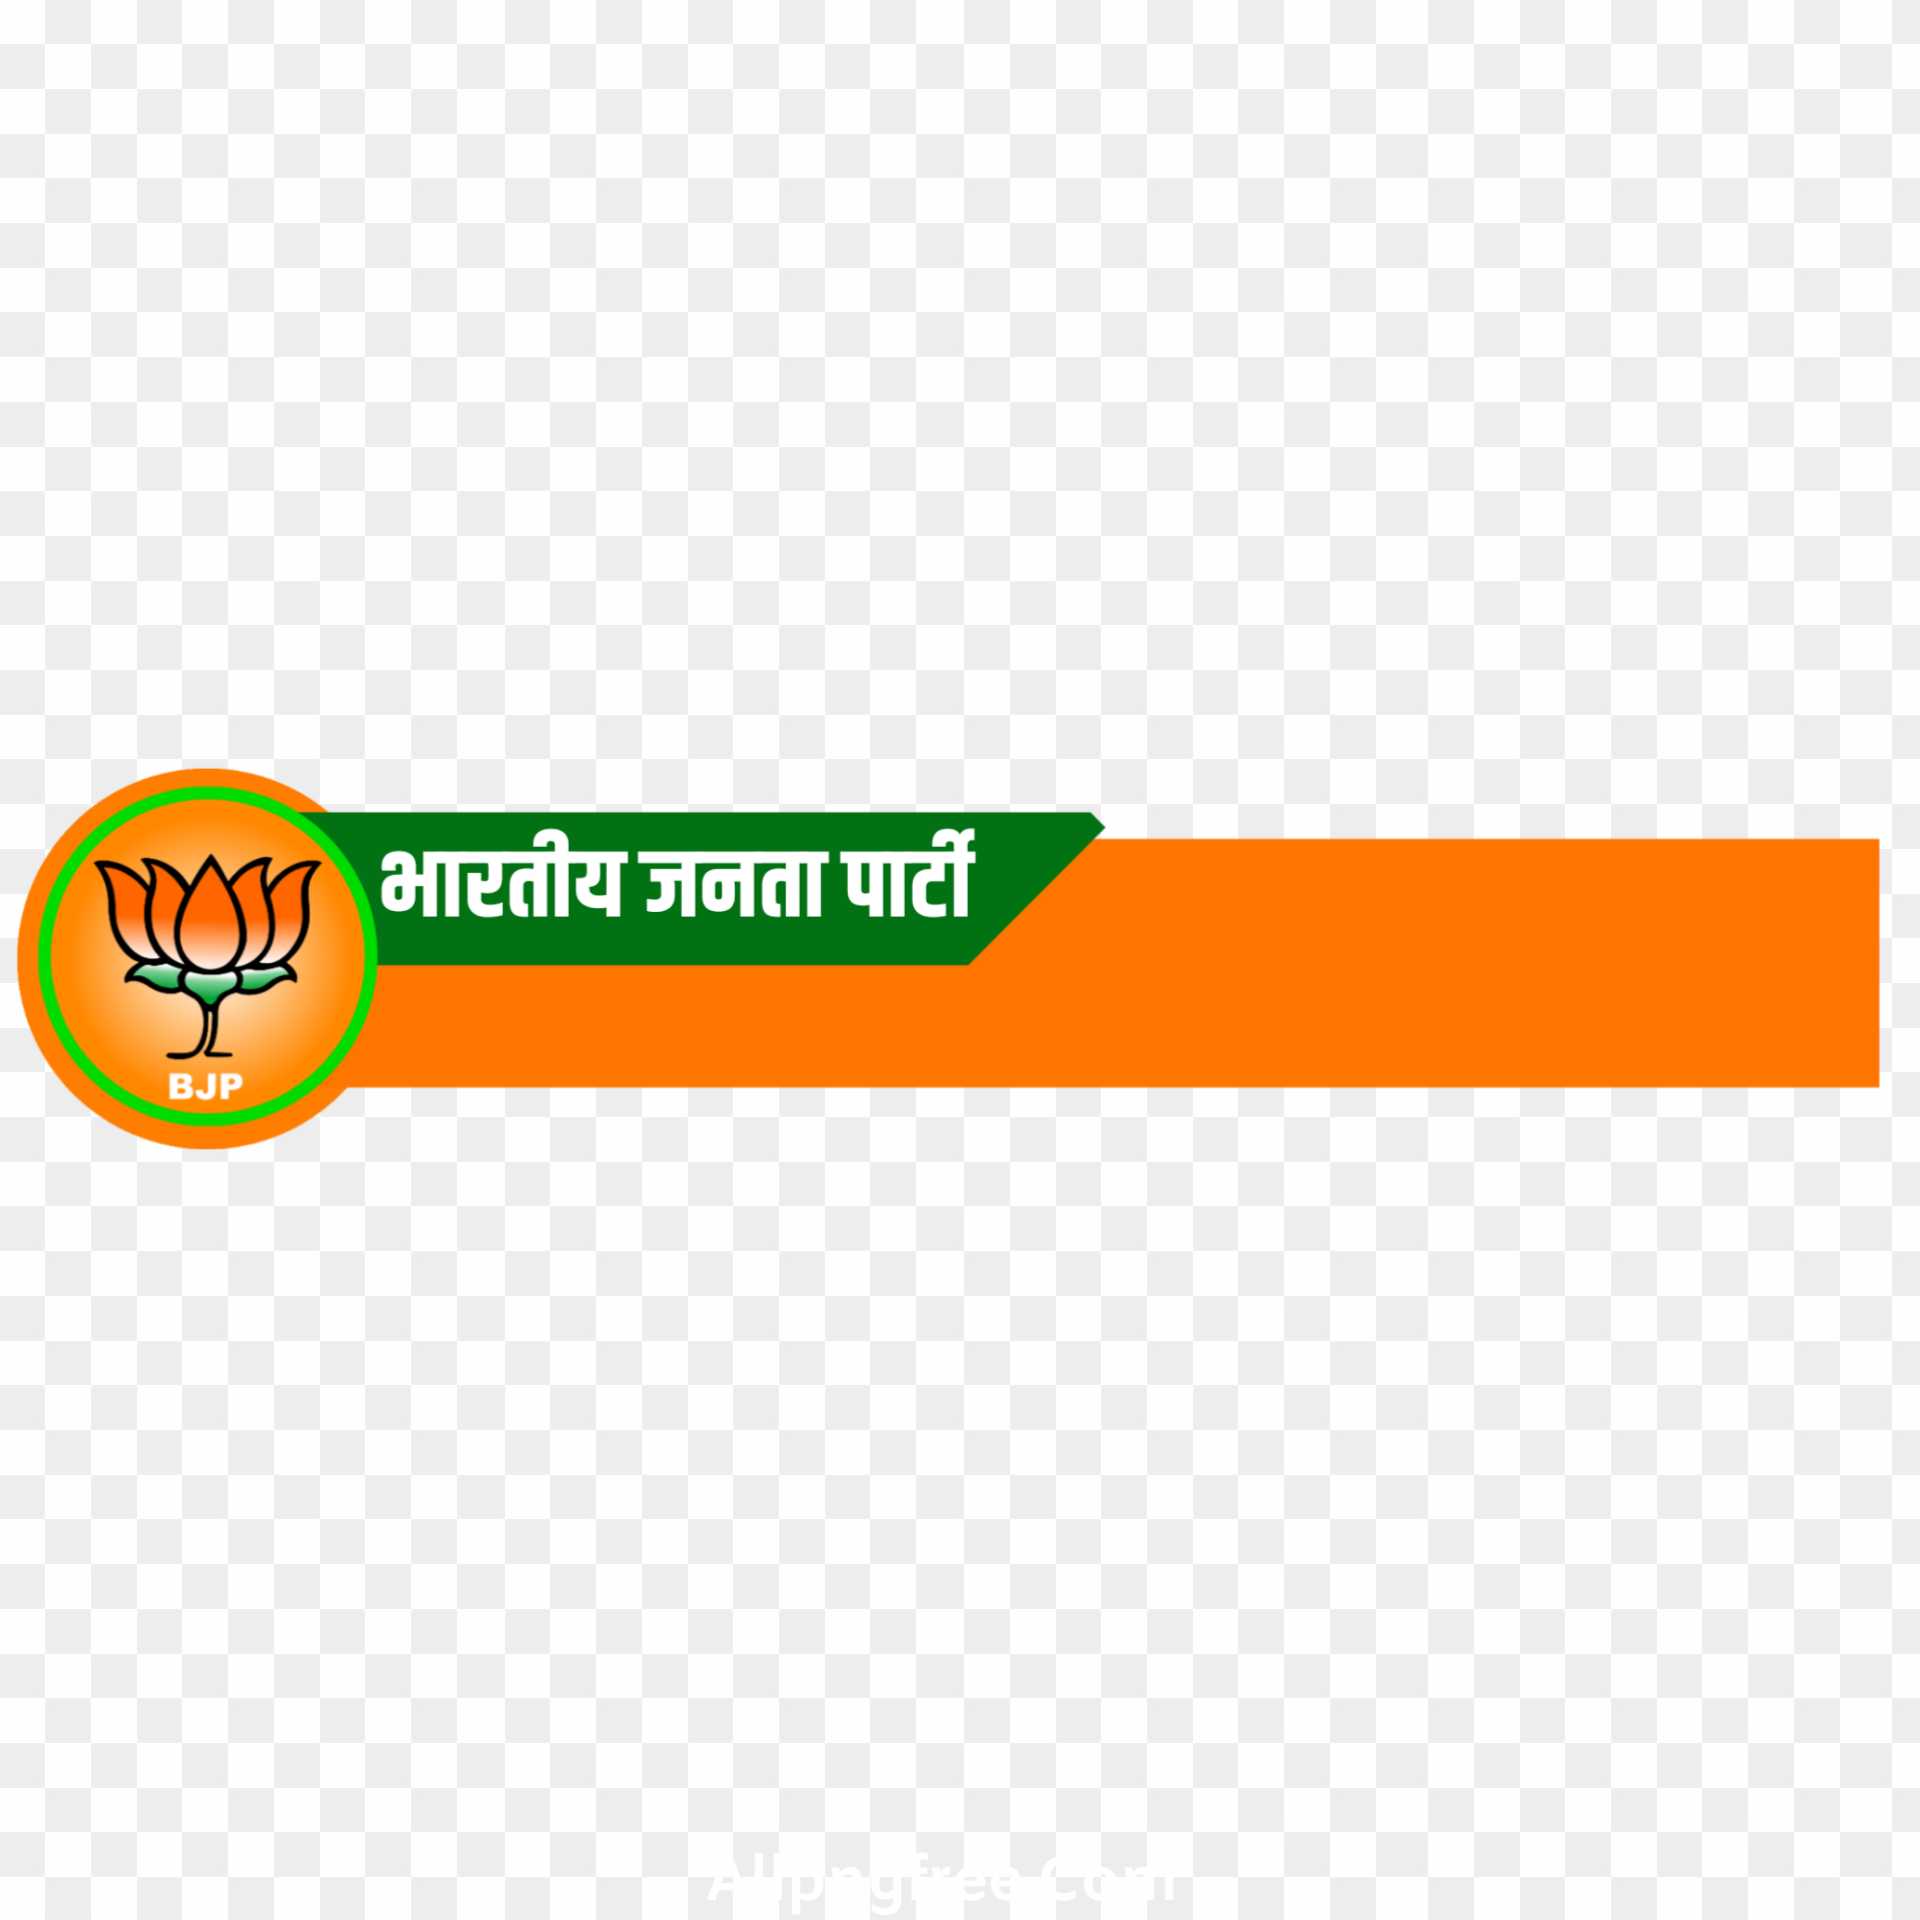 BJP Logo PNG HD on Yellow Background